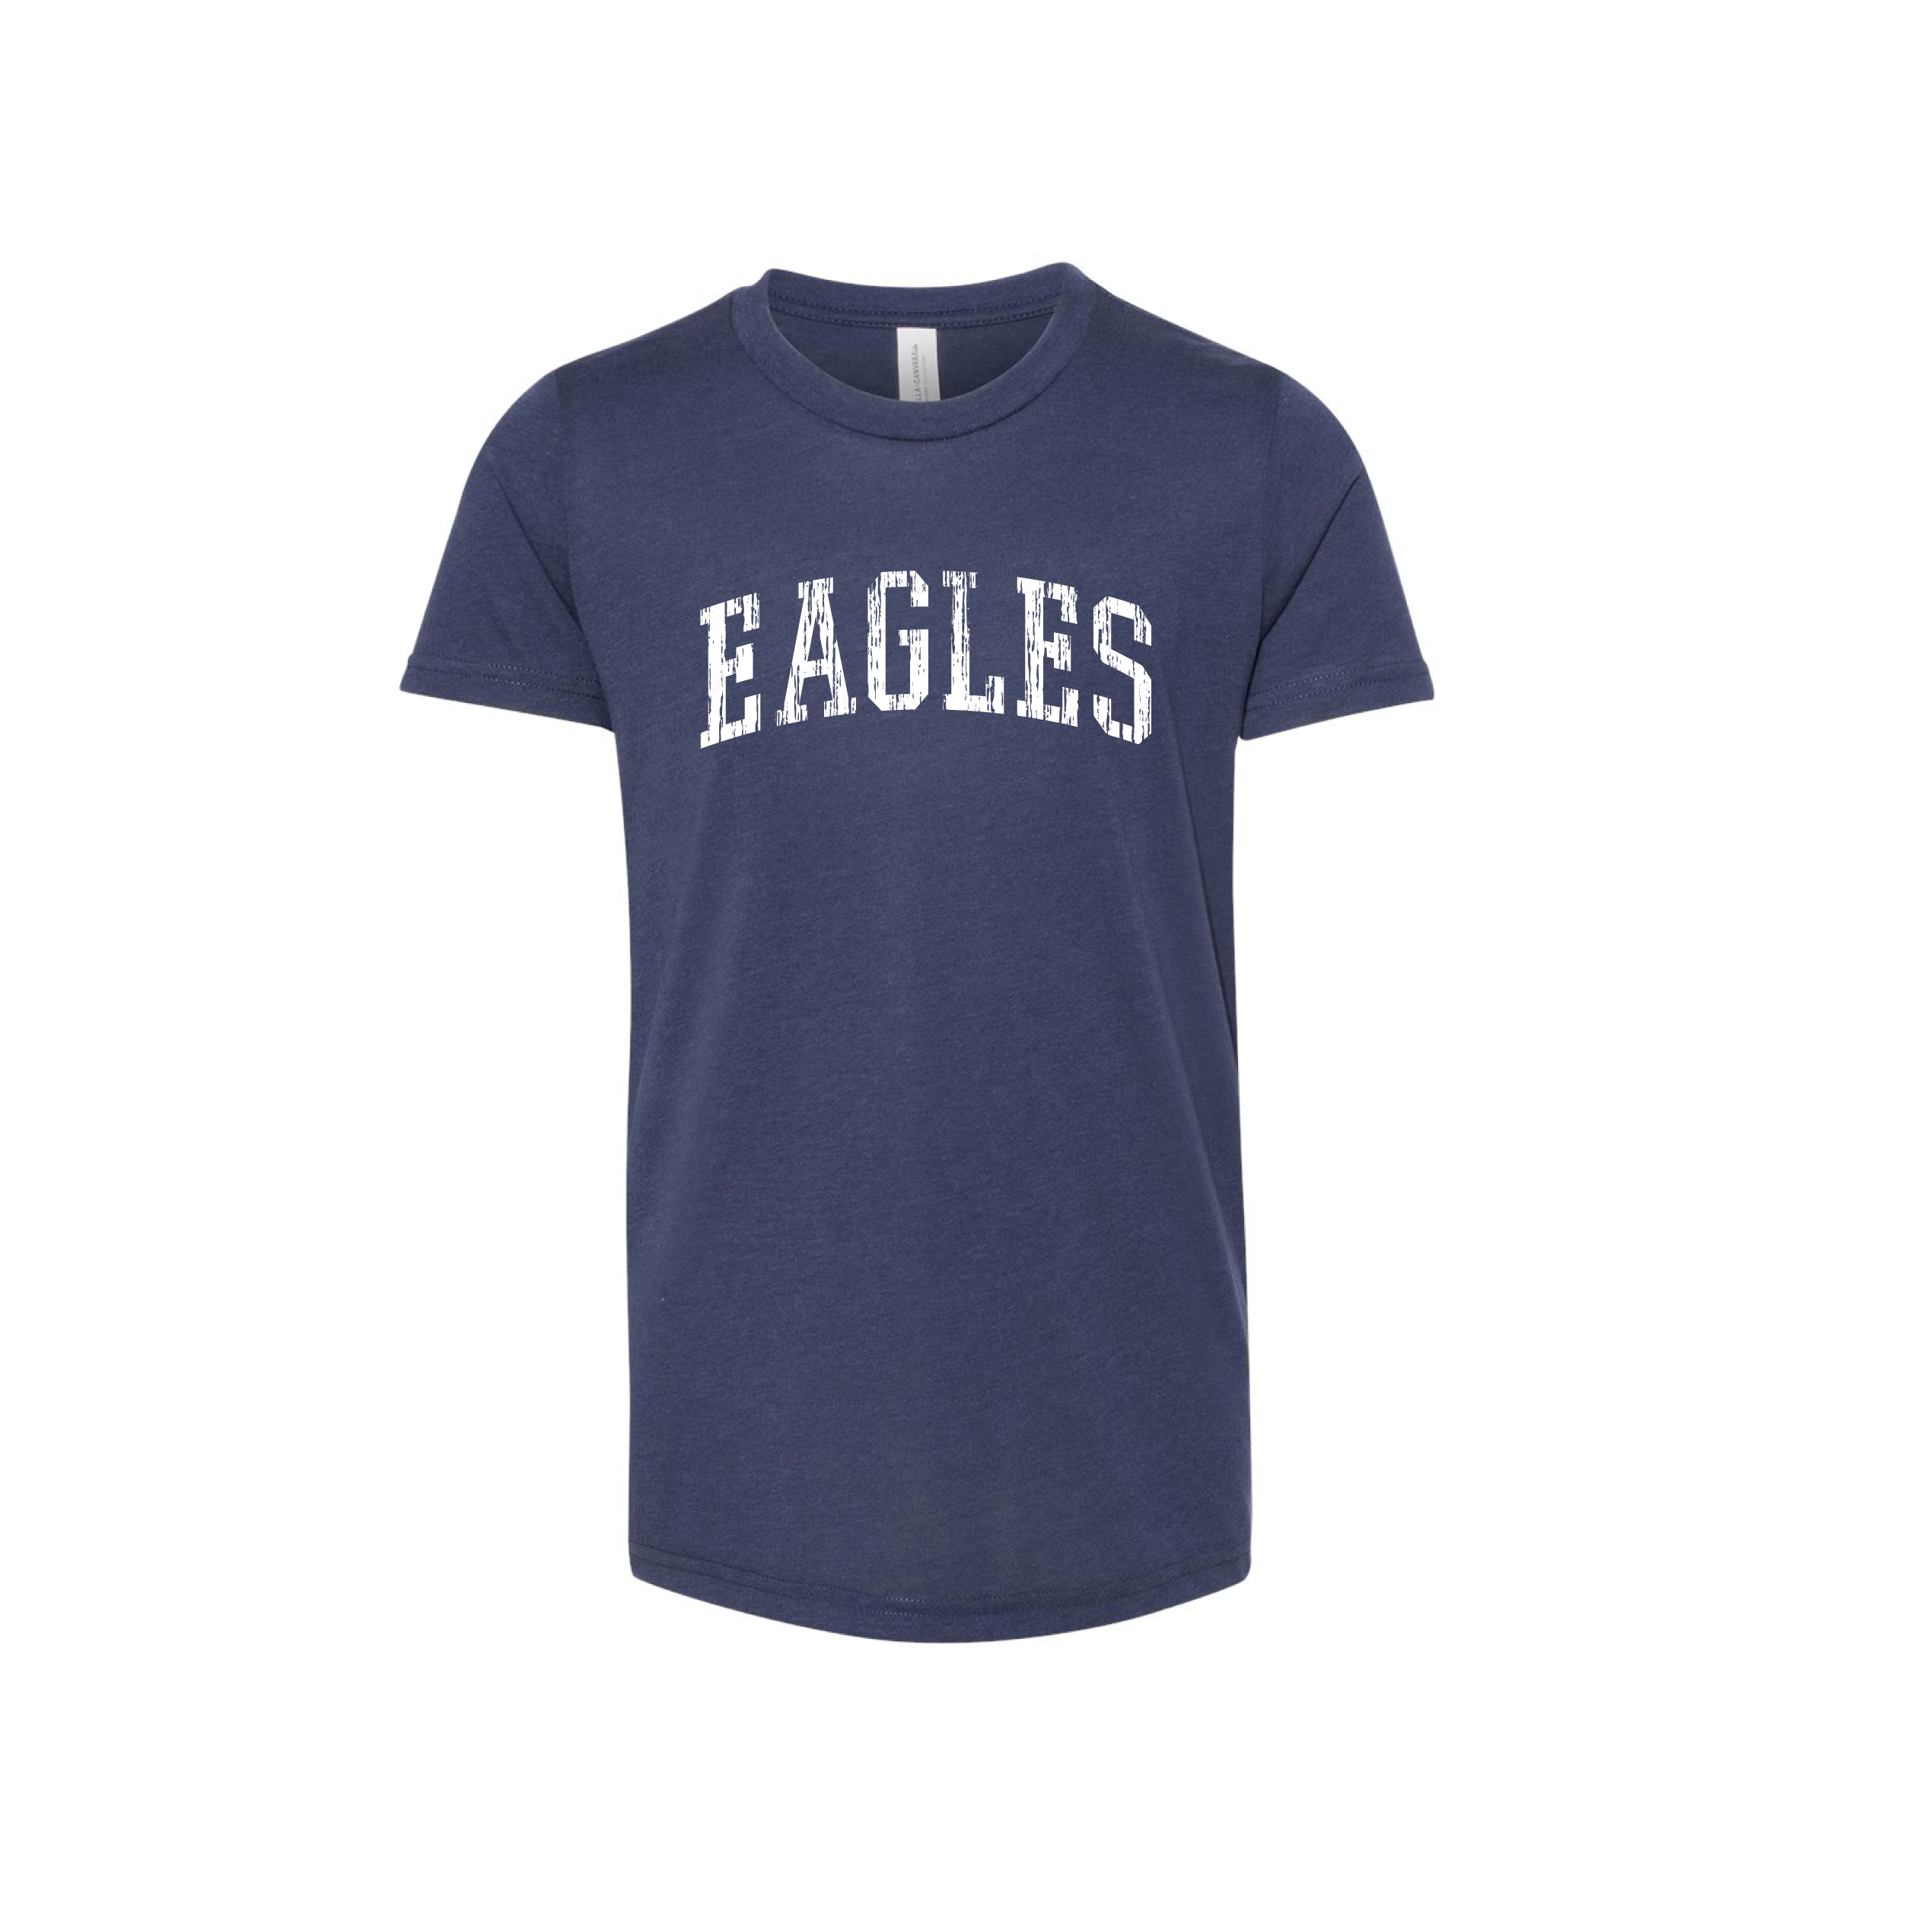 EAGLES YOUTH Bella + Canvas Triblend Tee in Navy